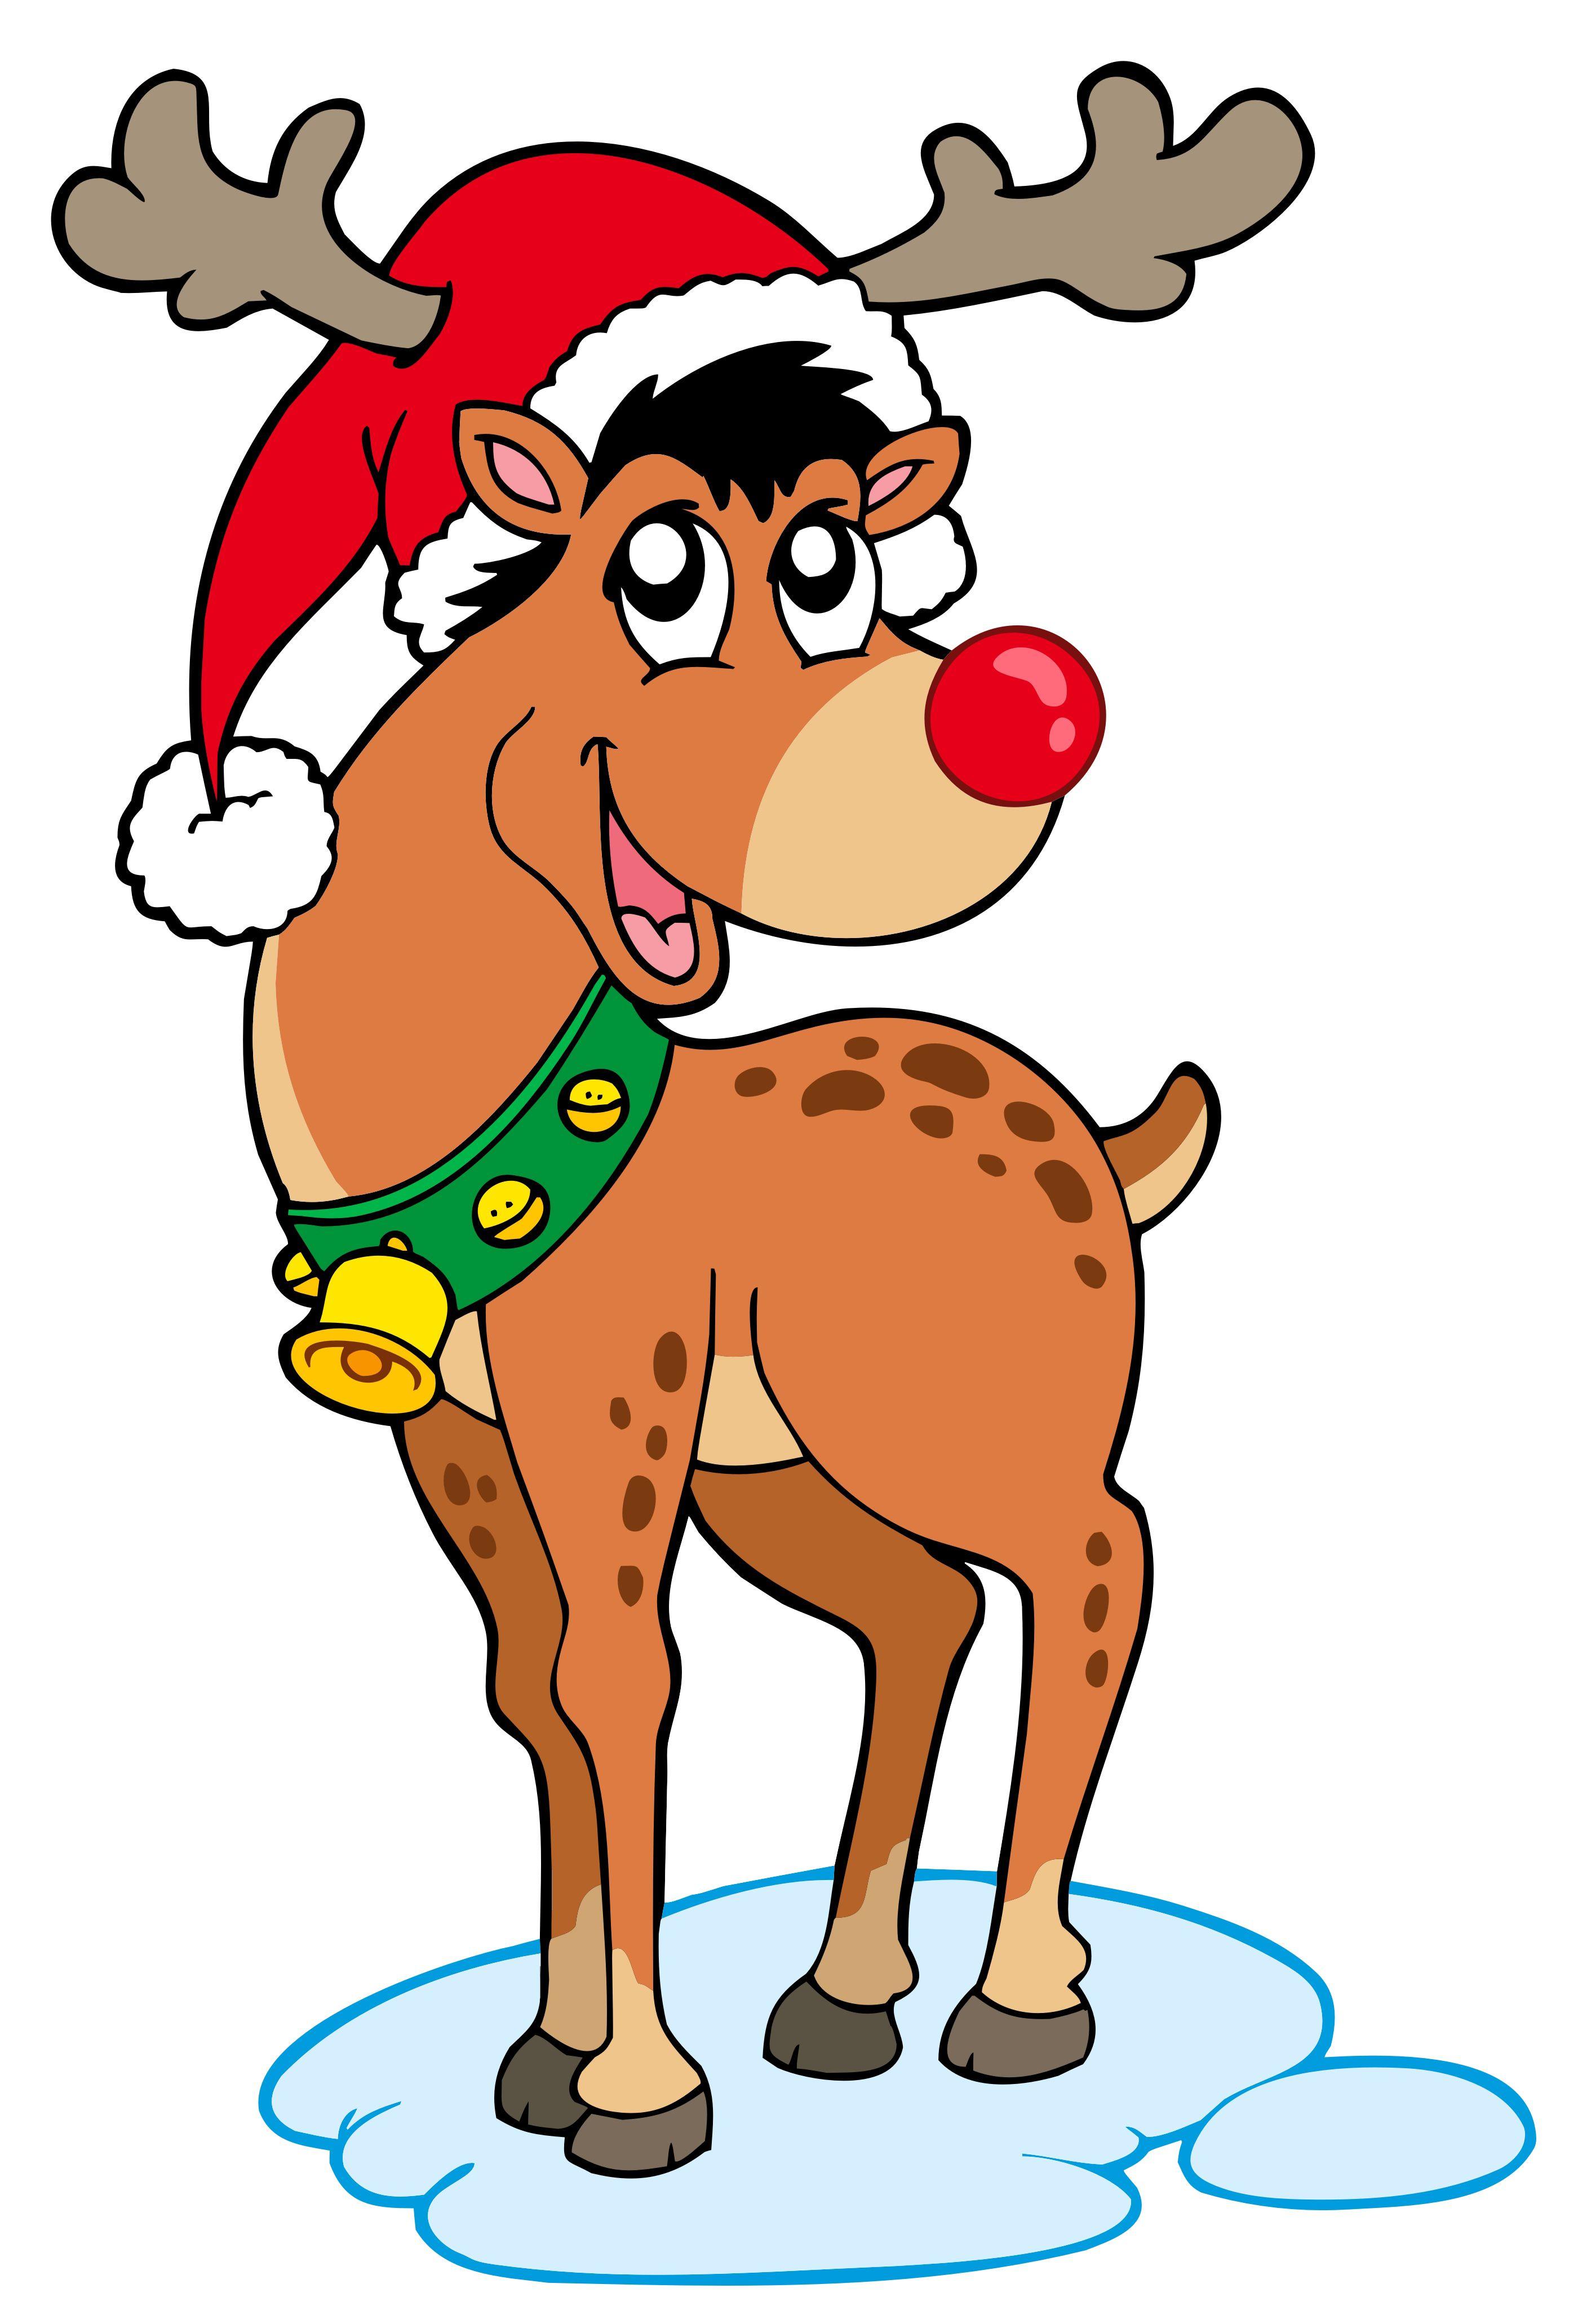 Rudolph The Red Nosed Reindeer Wallpaper 15085 HD Wallpaper